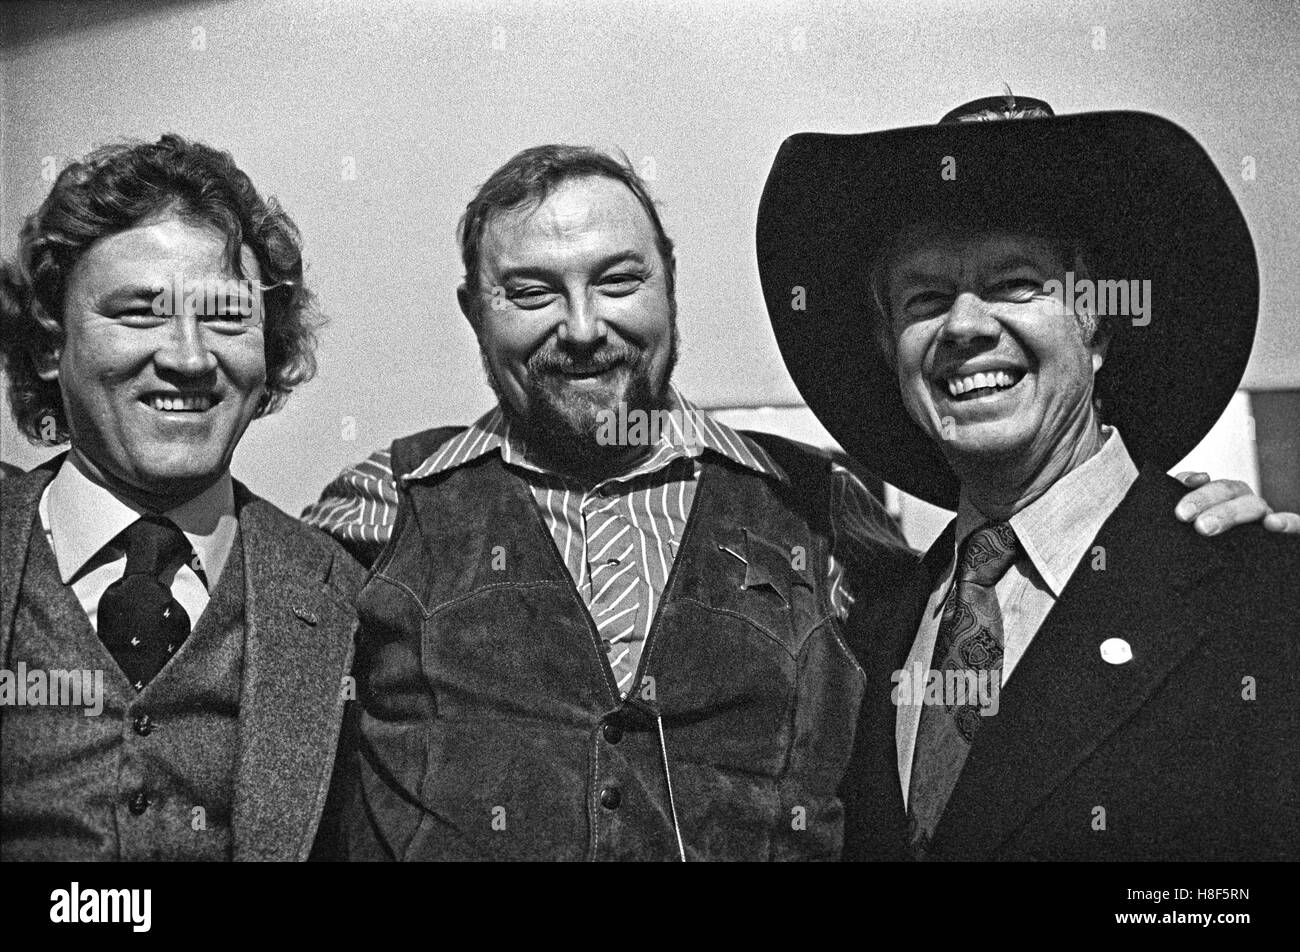 Musician Charlie Daniels (center) shares his signature cowboy hat with Democratic presidential candidate Jimmy Carter backstage at Atlanta's Fox Theater at a Carter fundraiser. Capricorn Records founder Phil Walden is at left. Stock Photo